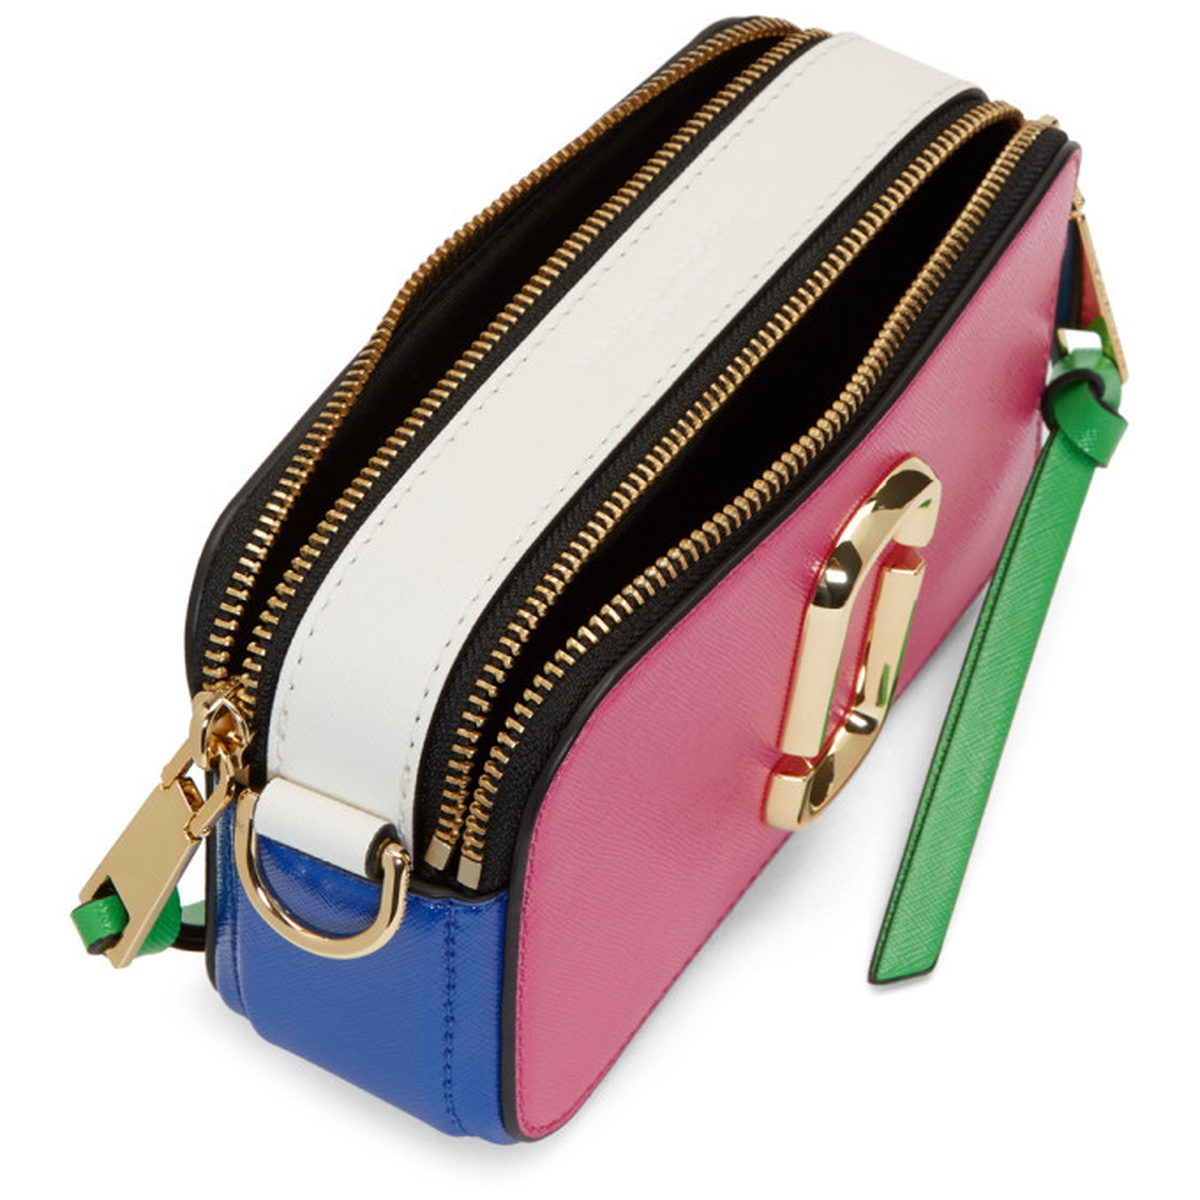 Marc Jacobs Pink and Blue Snapshot Bag Marc Jacobs